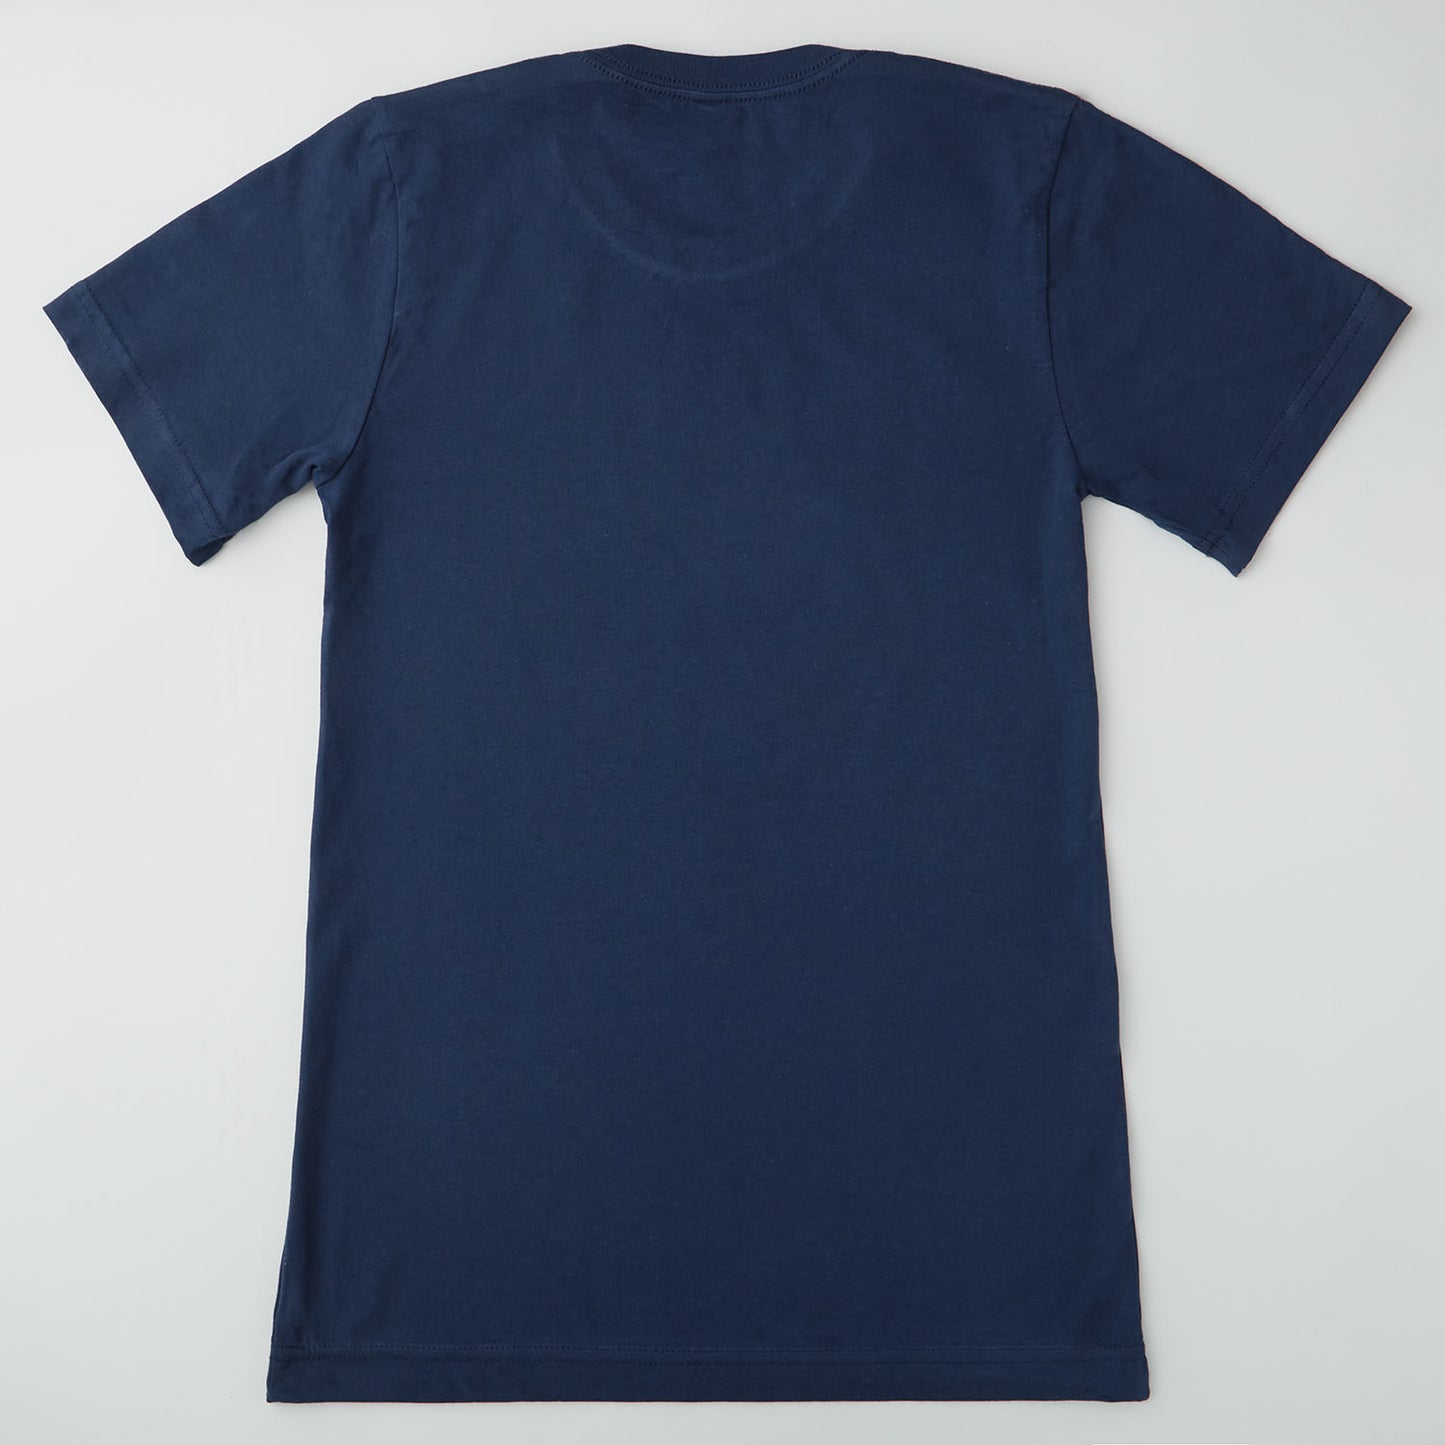 Scrappy & Bright Navy (Christmas in July) T-shirt - L Alternative View #1